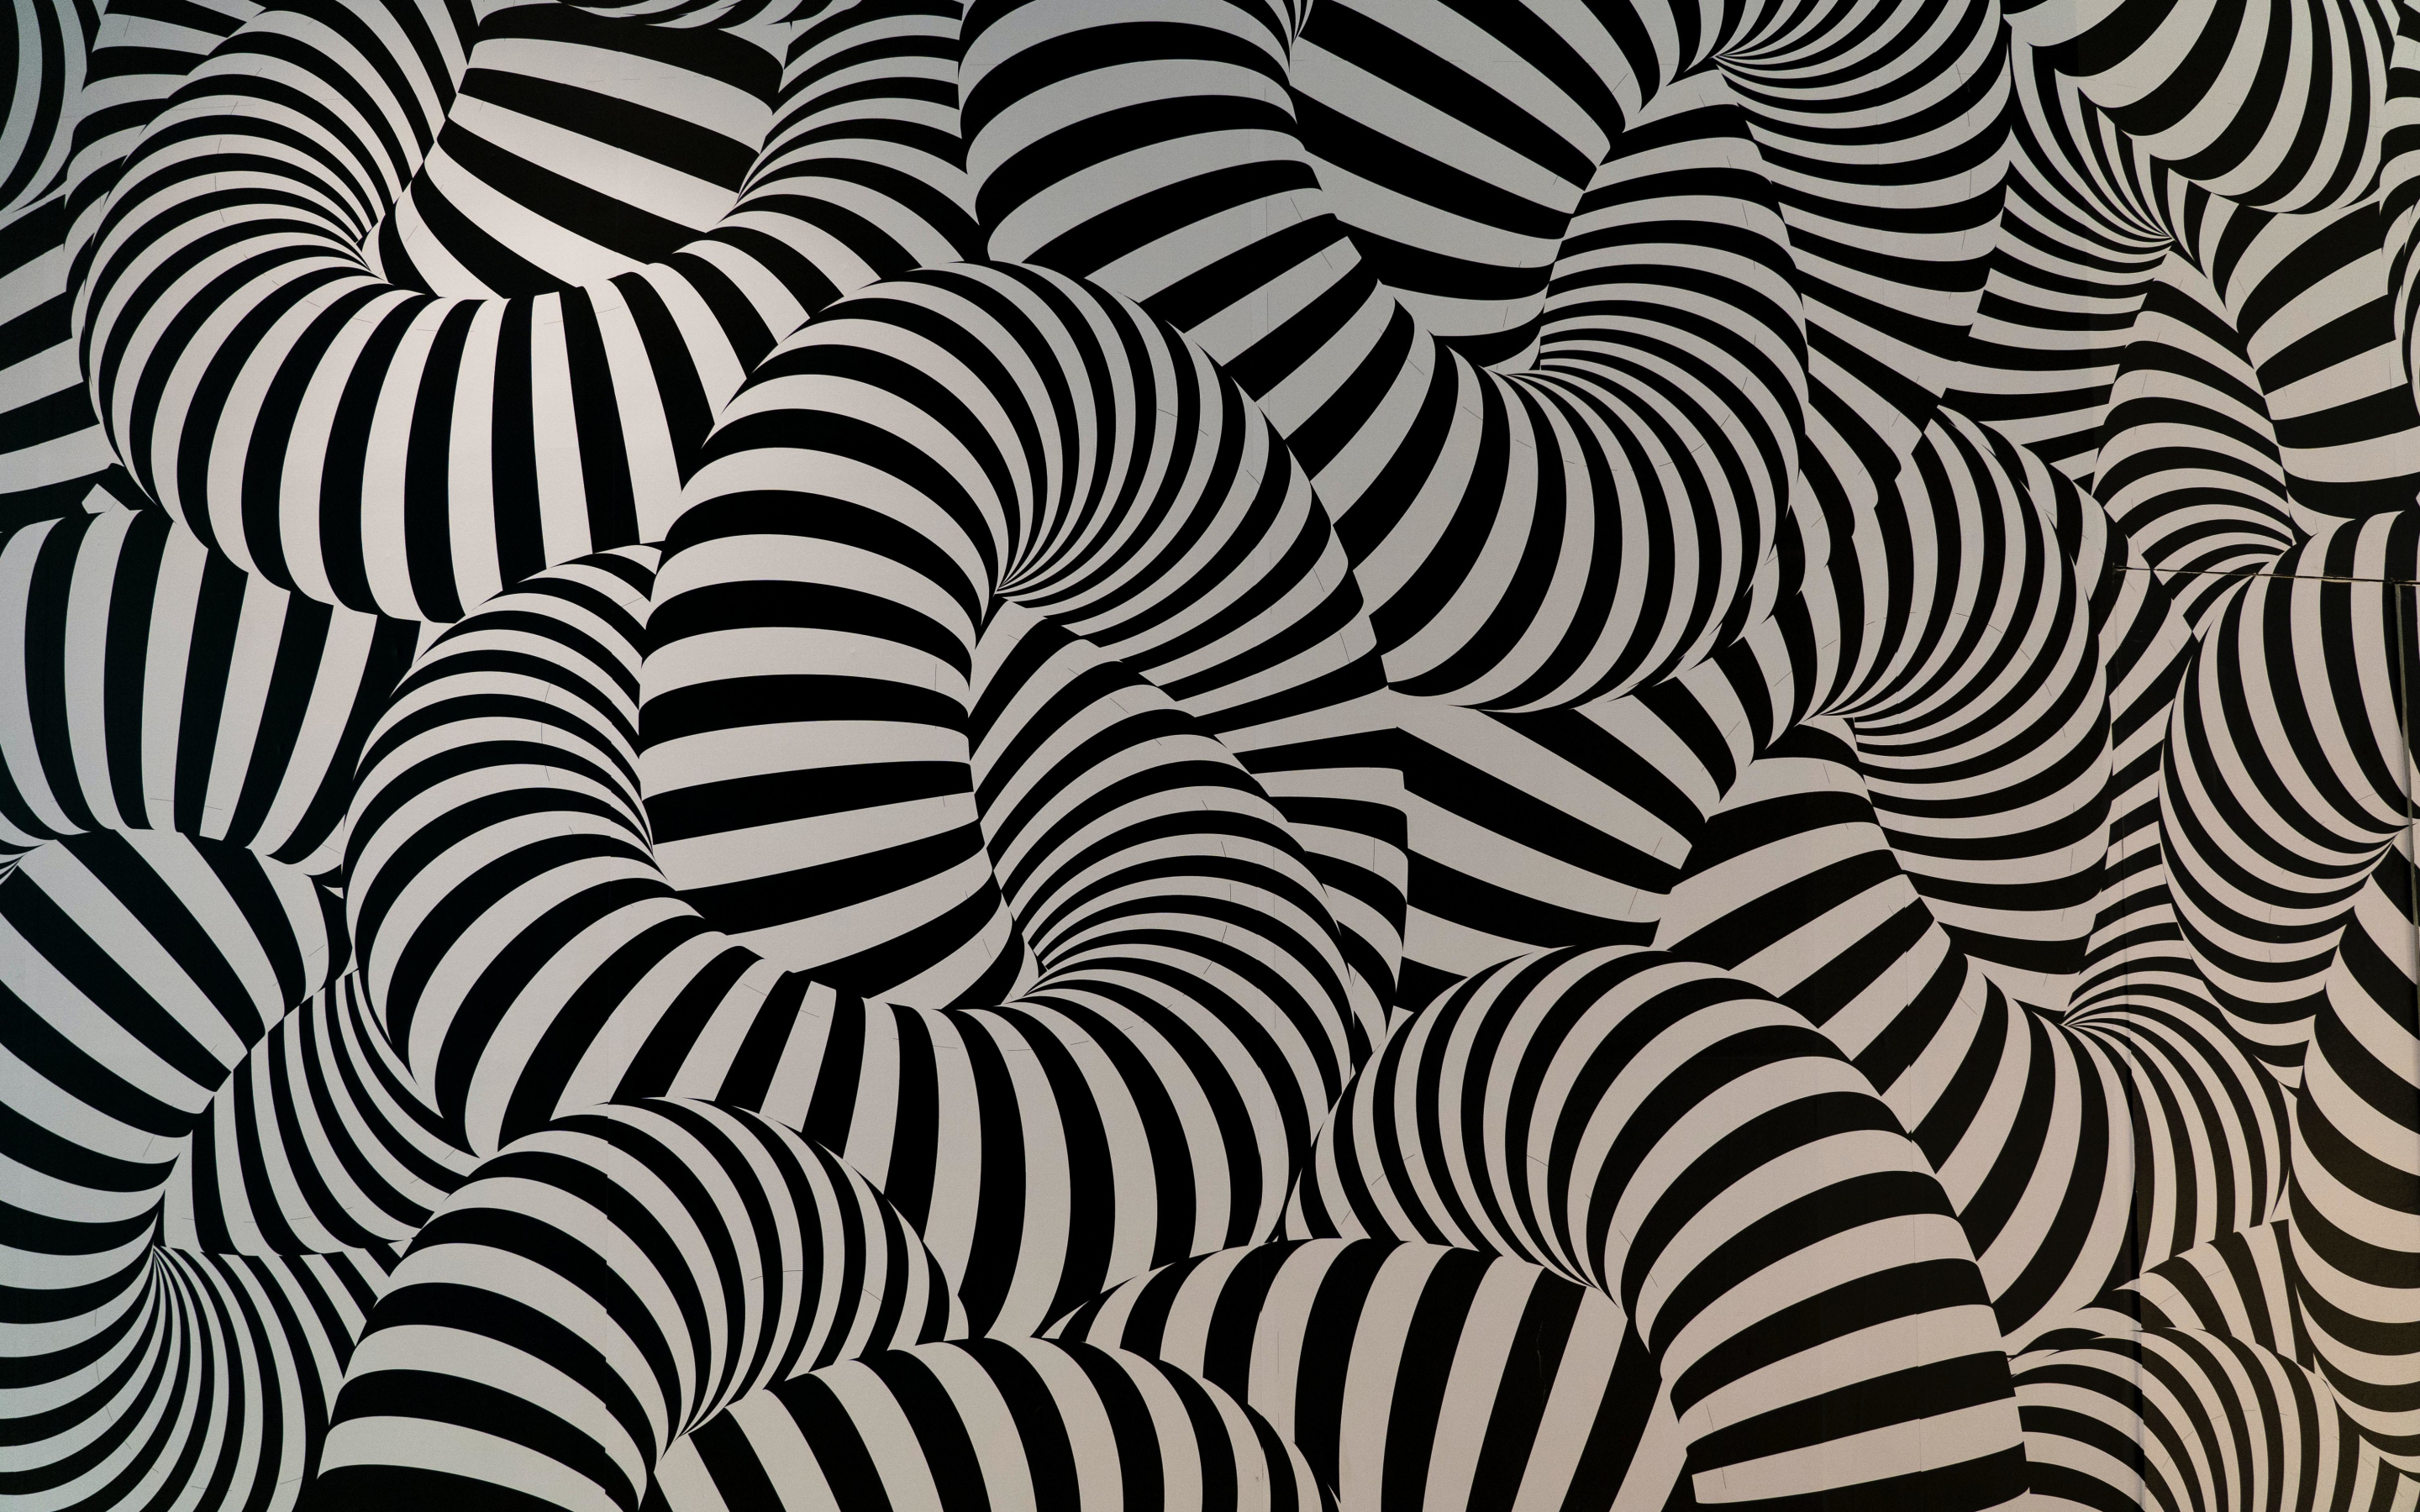 Illusion, stripes, twisting, abstraction, 2880x1800 wallpaper